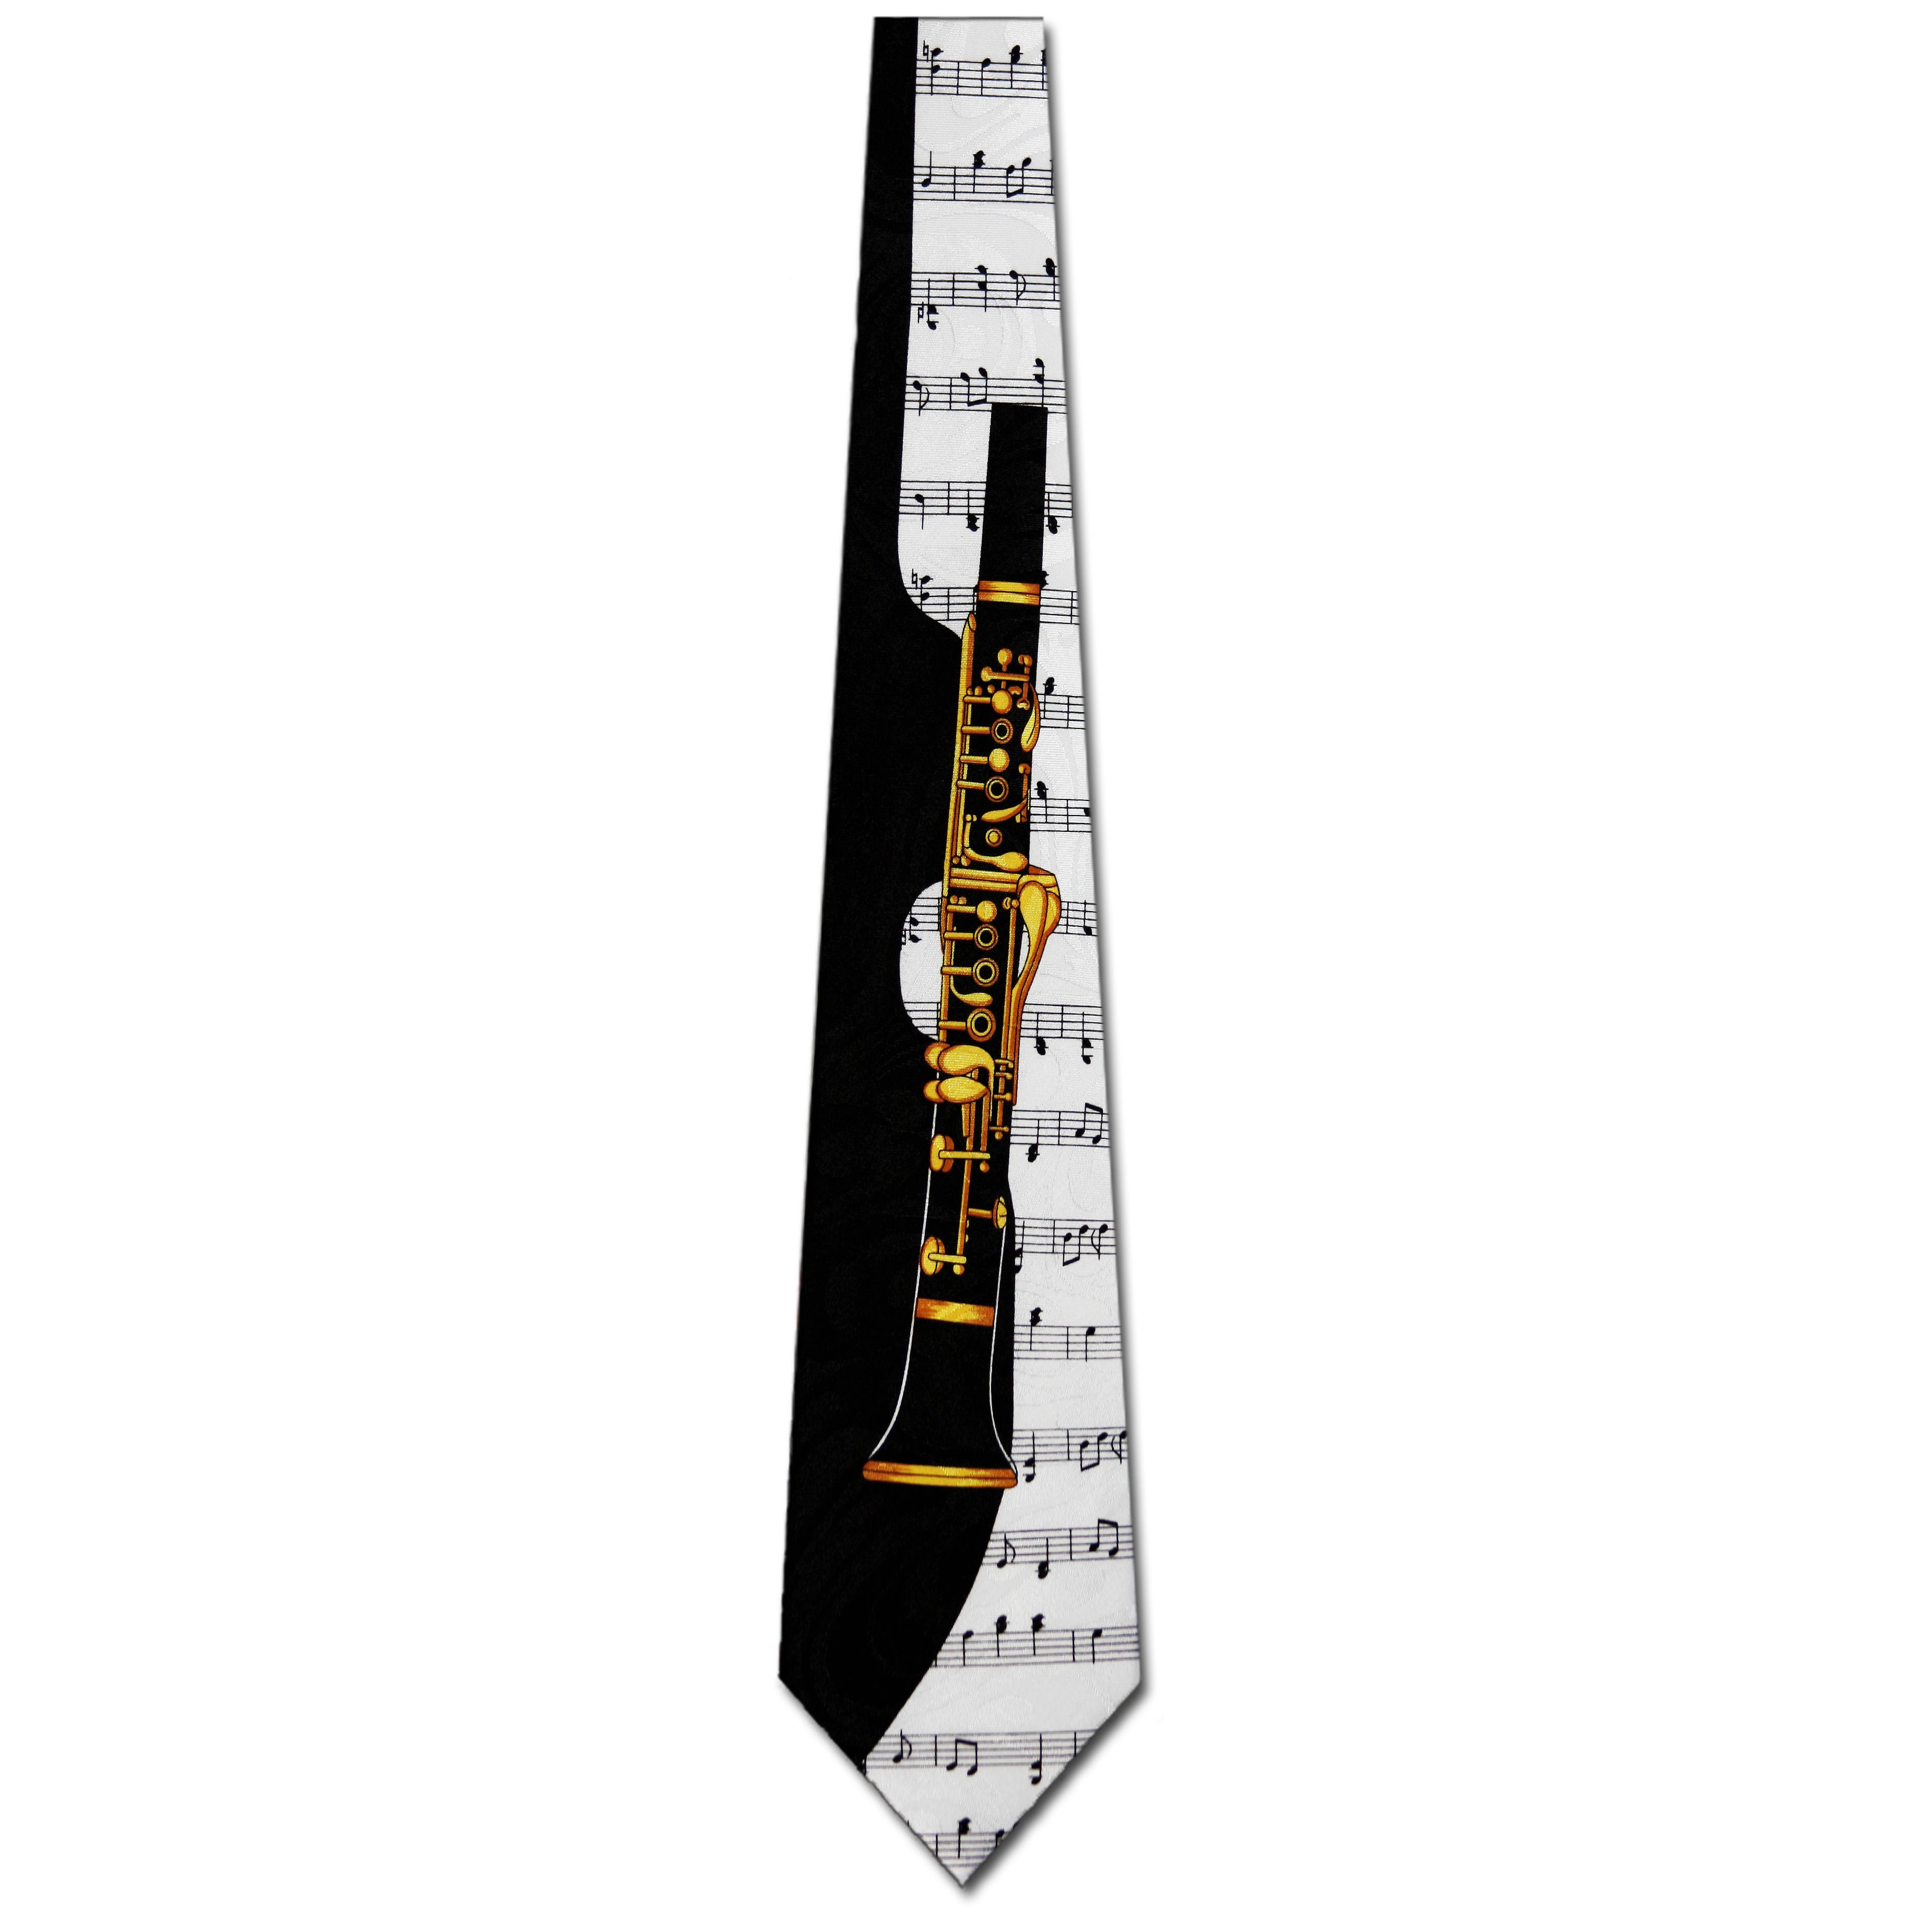 Clarinet And Notes Necktie Mens Tie by Steven Harr 